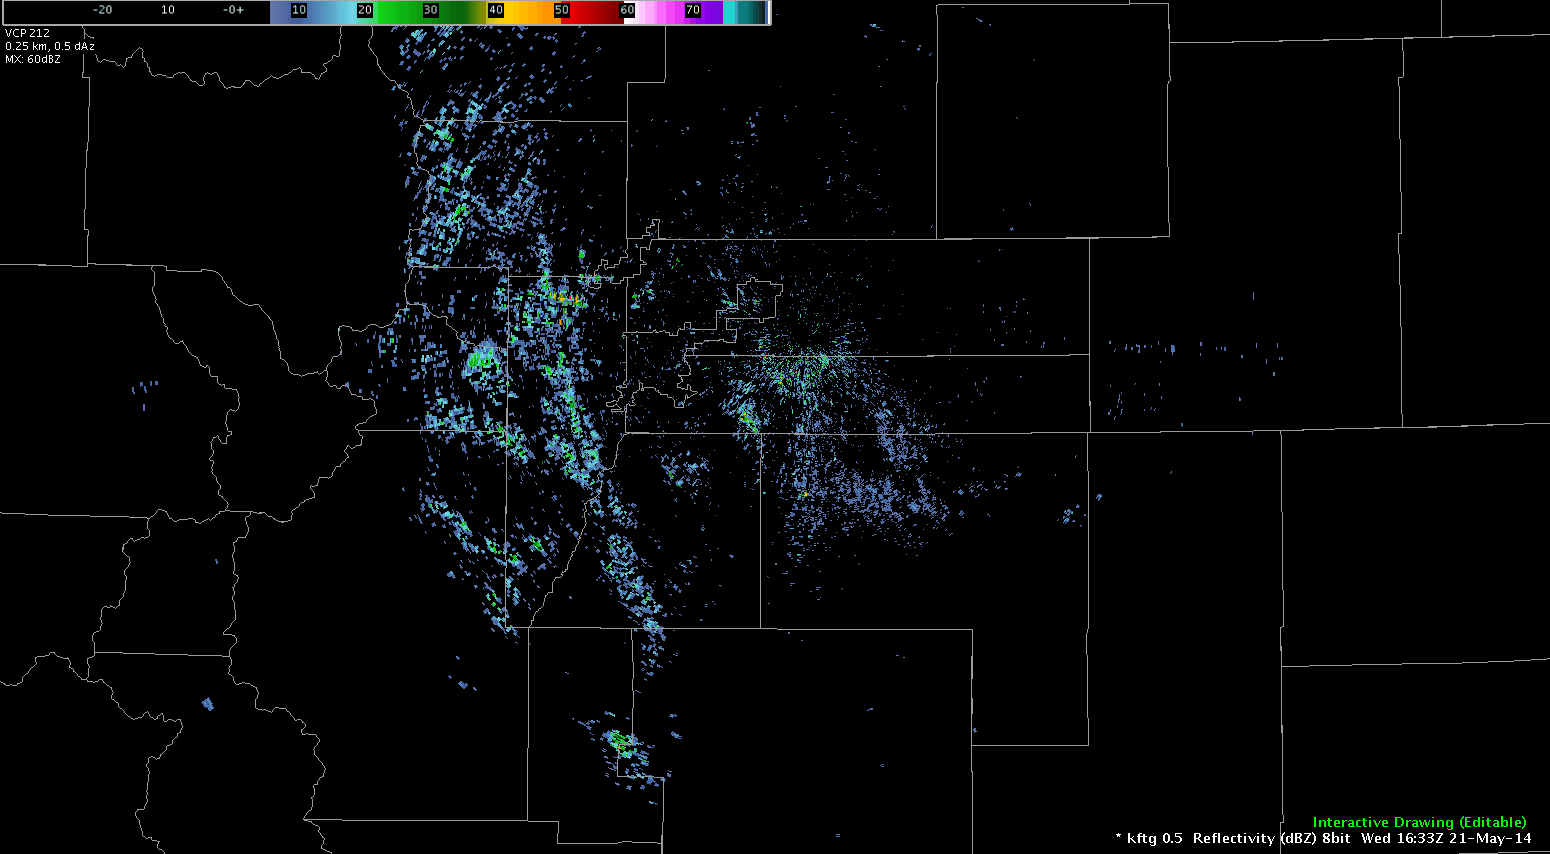 0.5 reflectivity from KFTG on May 21, 2014.